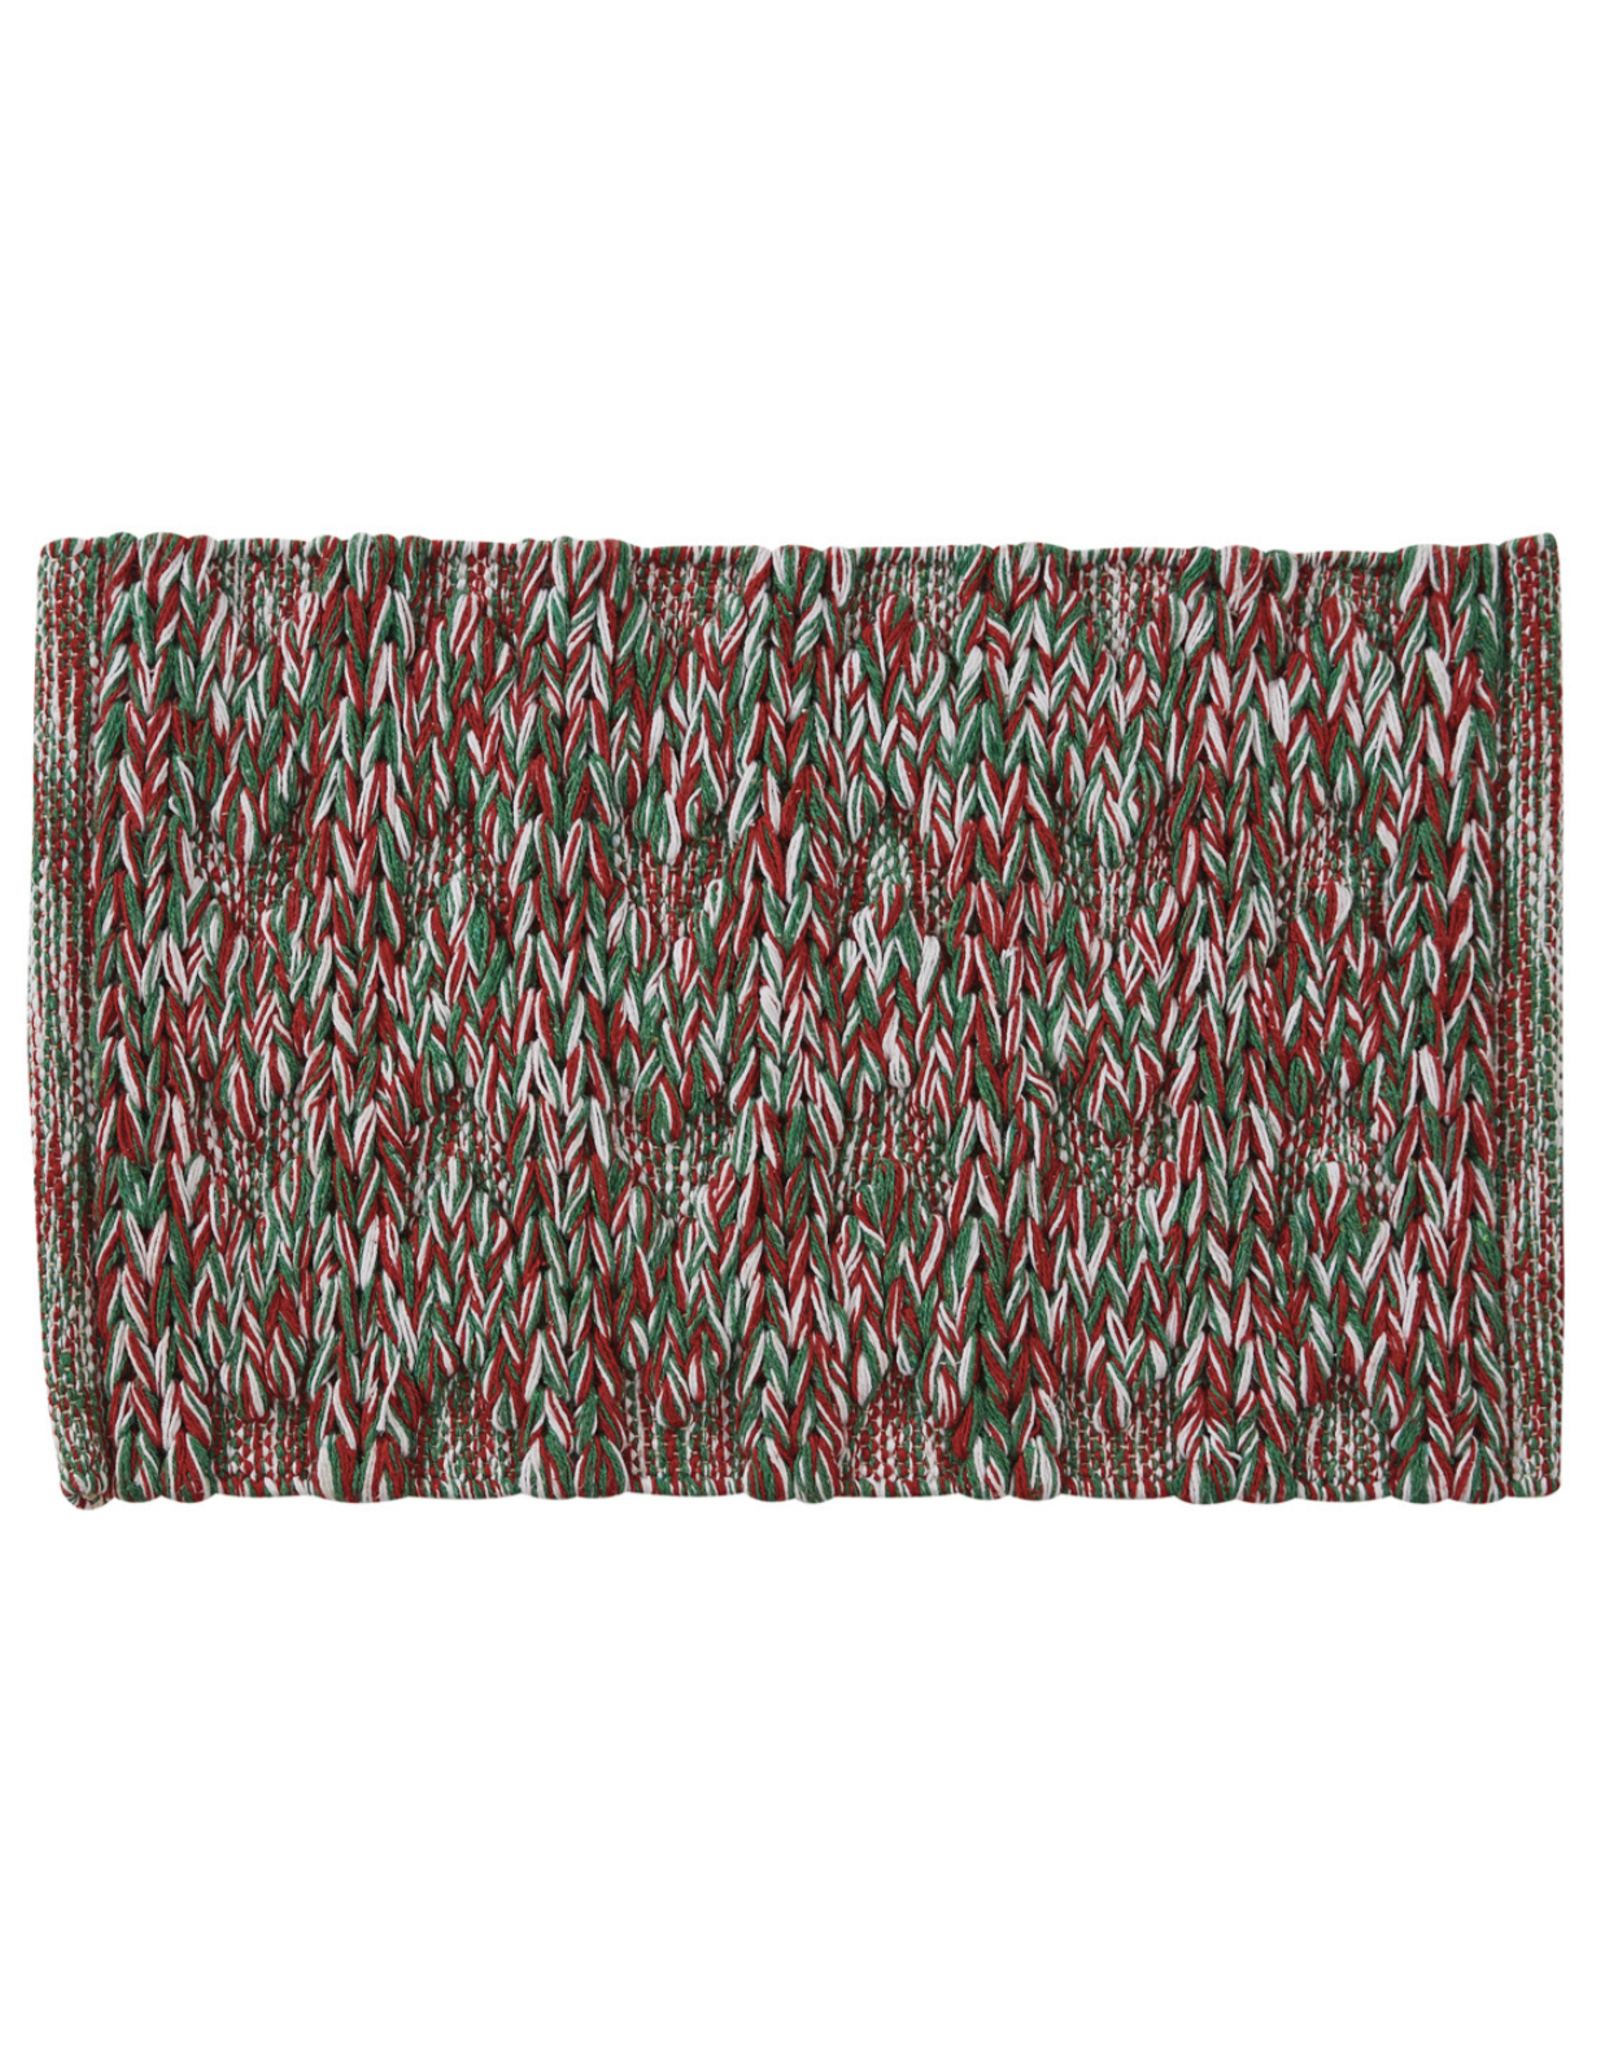 Park Designs Placemat - Hillside Holiday